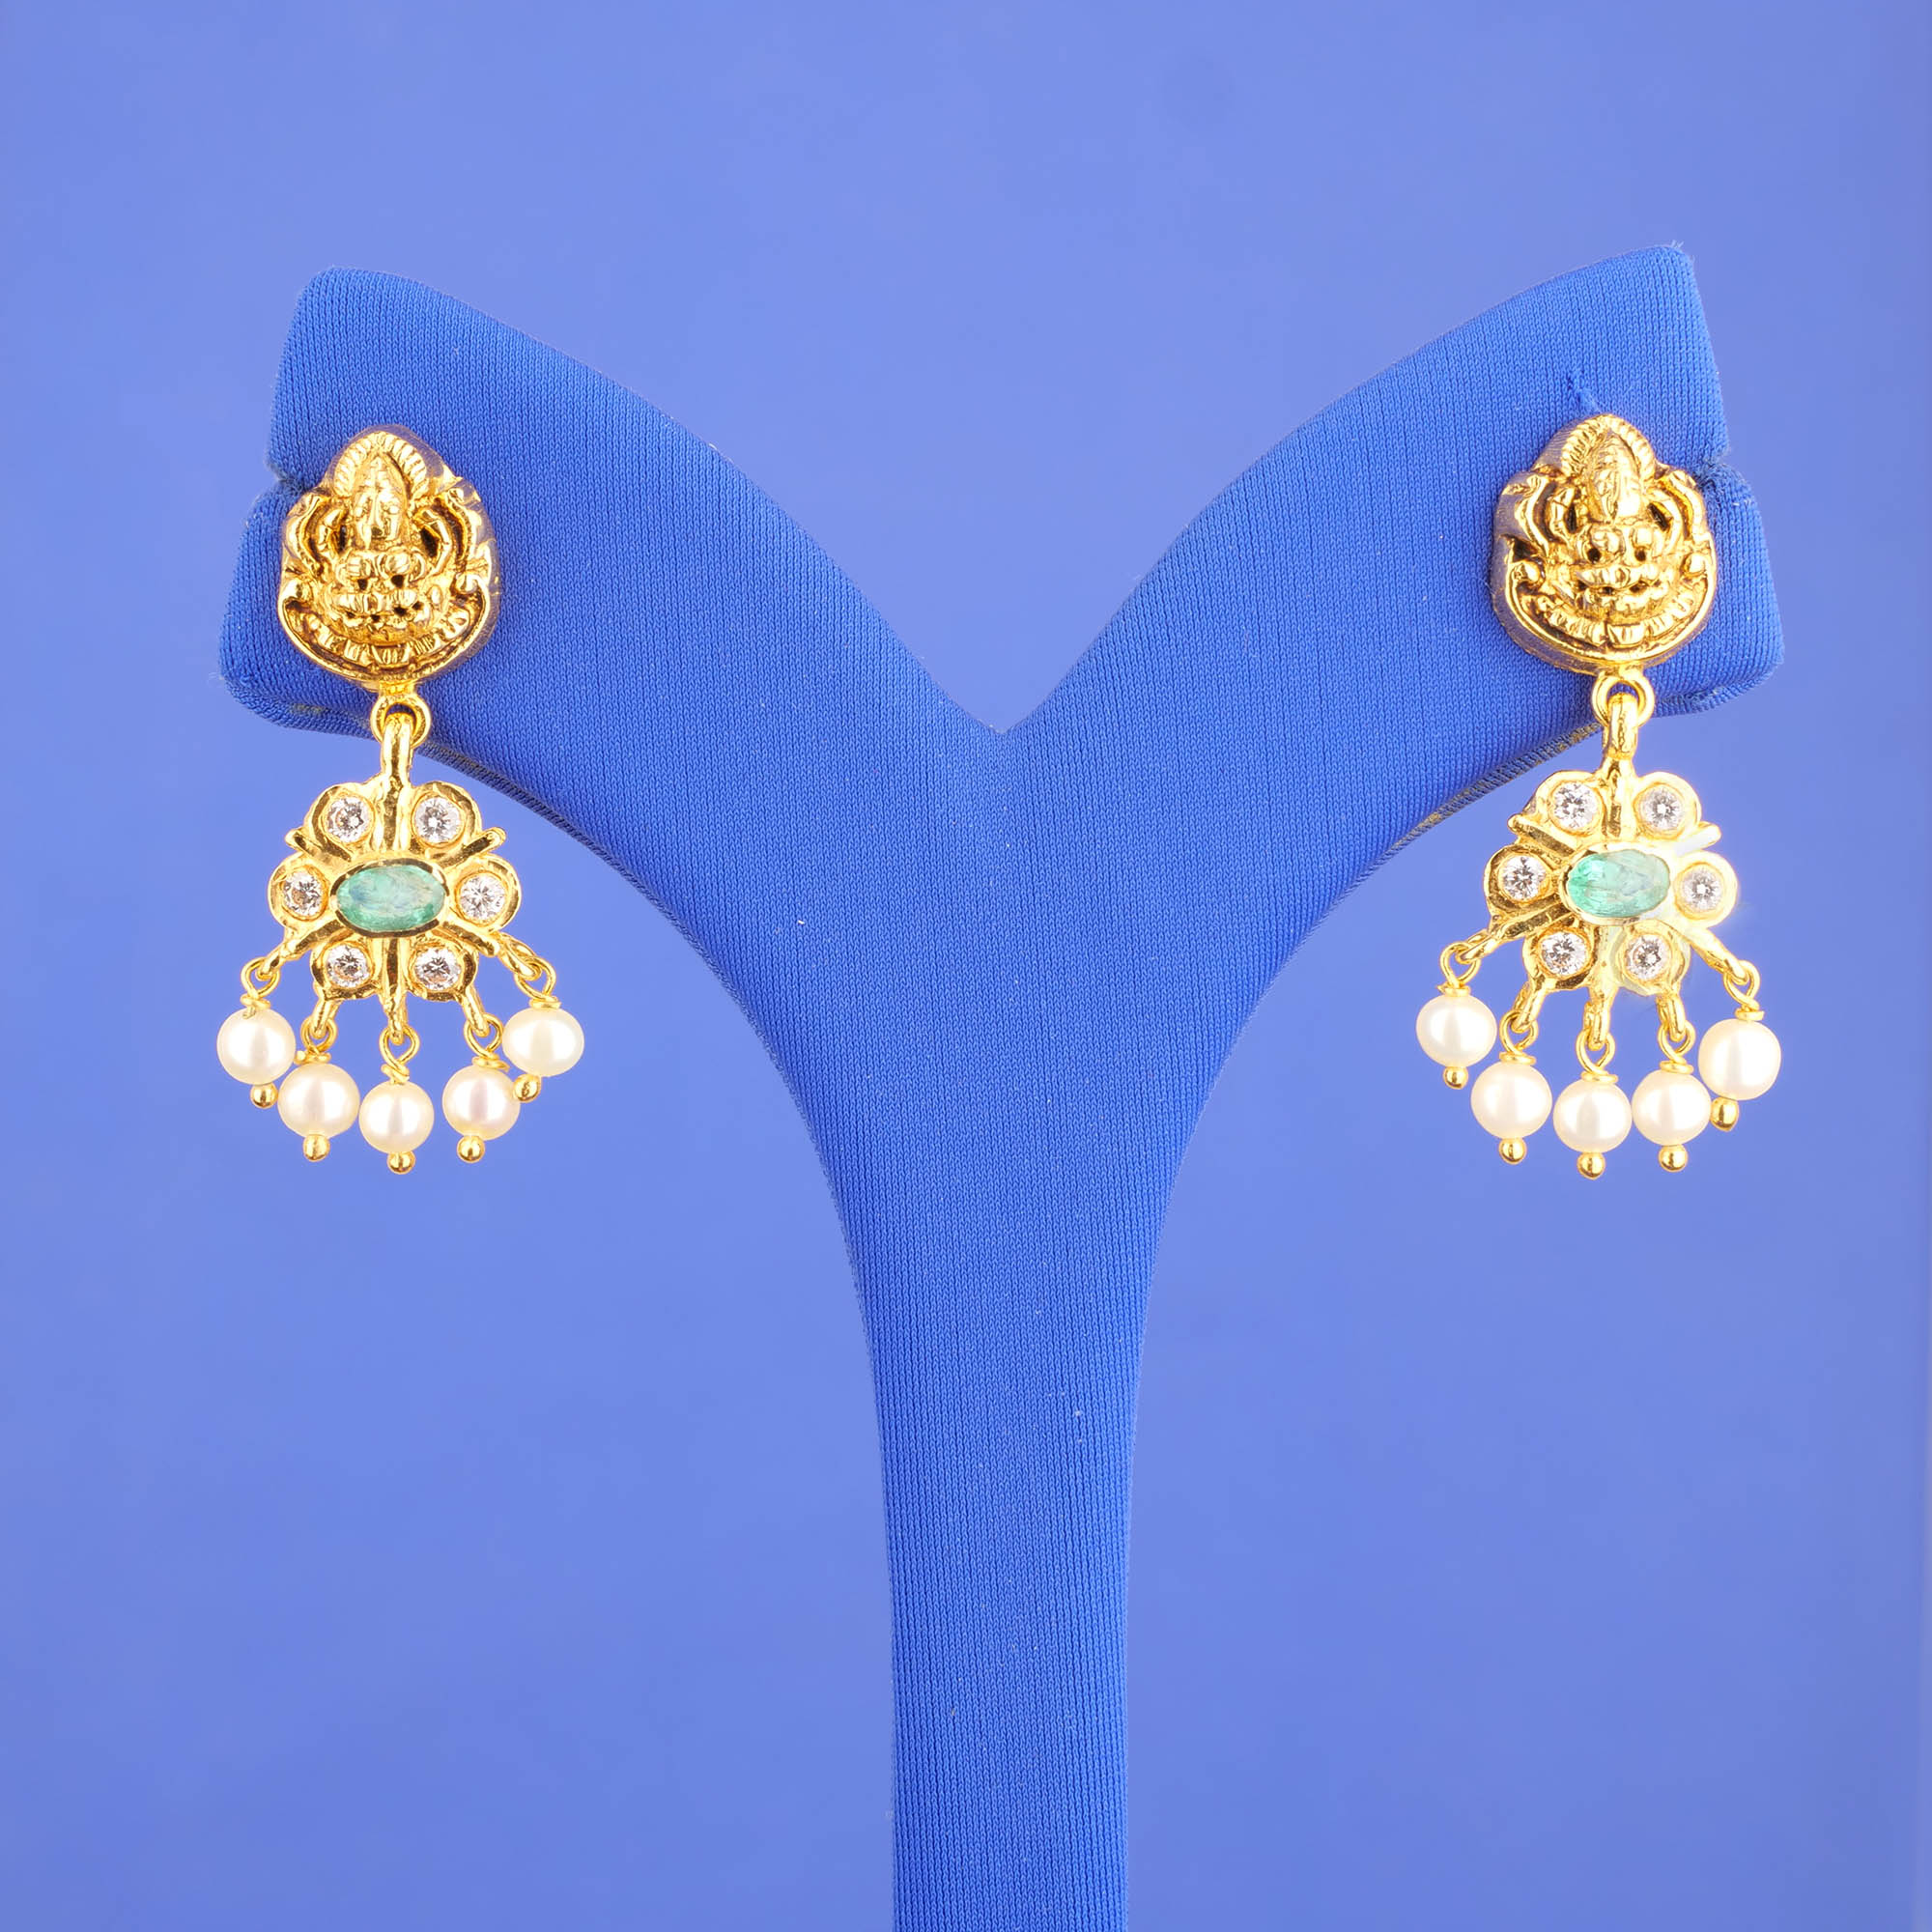 22K 'Antique' Gold, CZ, Pearl, and Stones Earrings